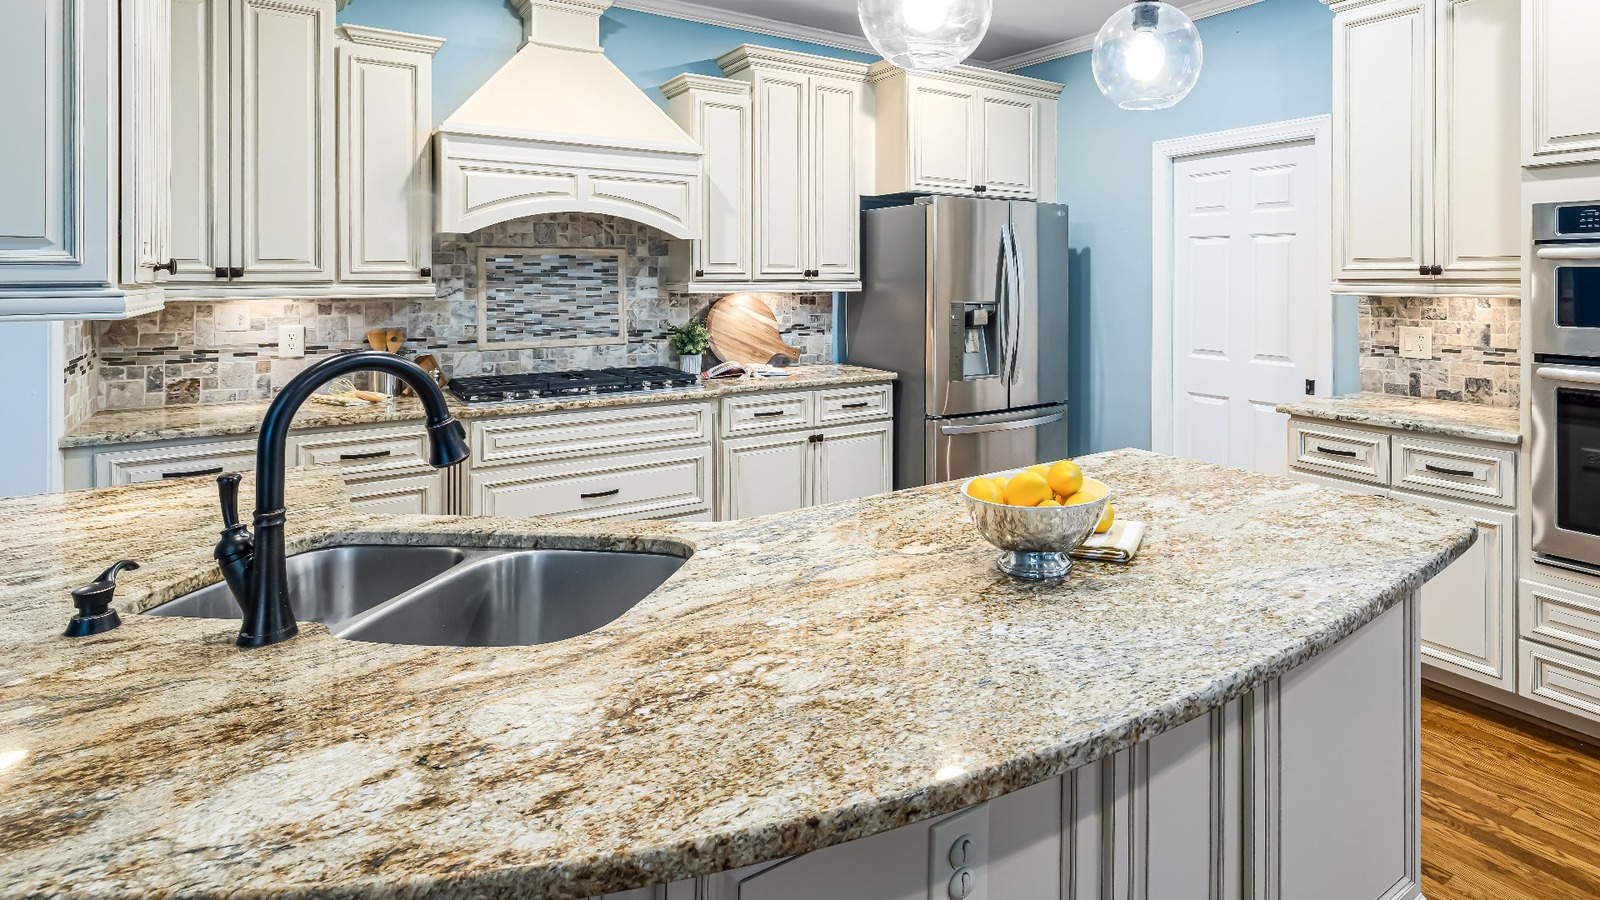 How To Get The Look Of Granite Countertops For Way Less